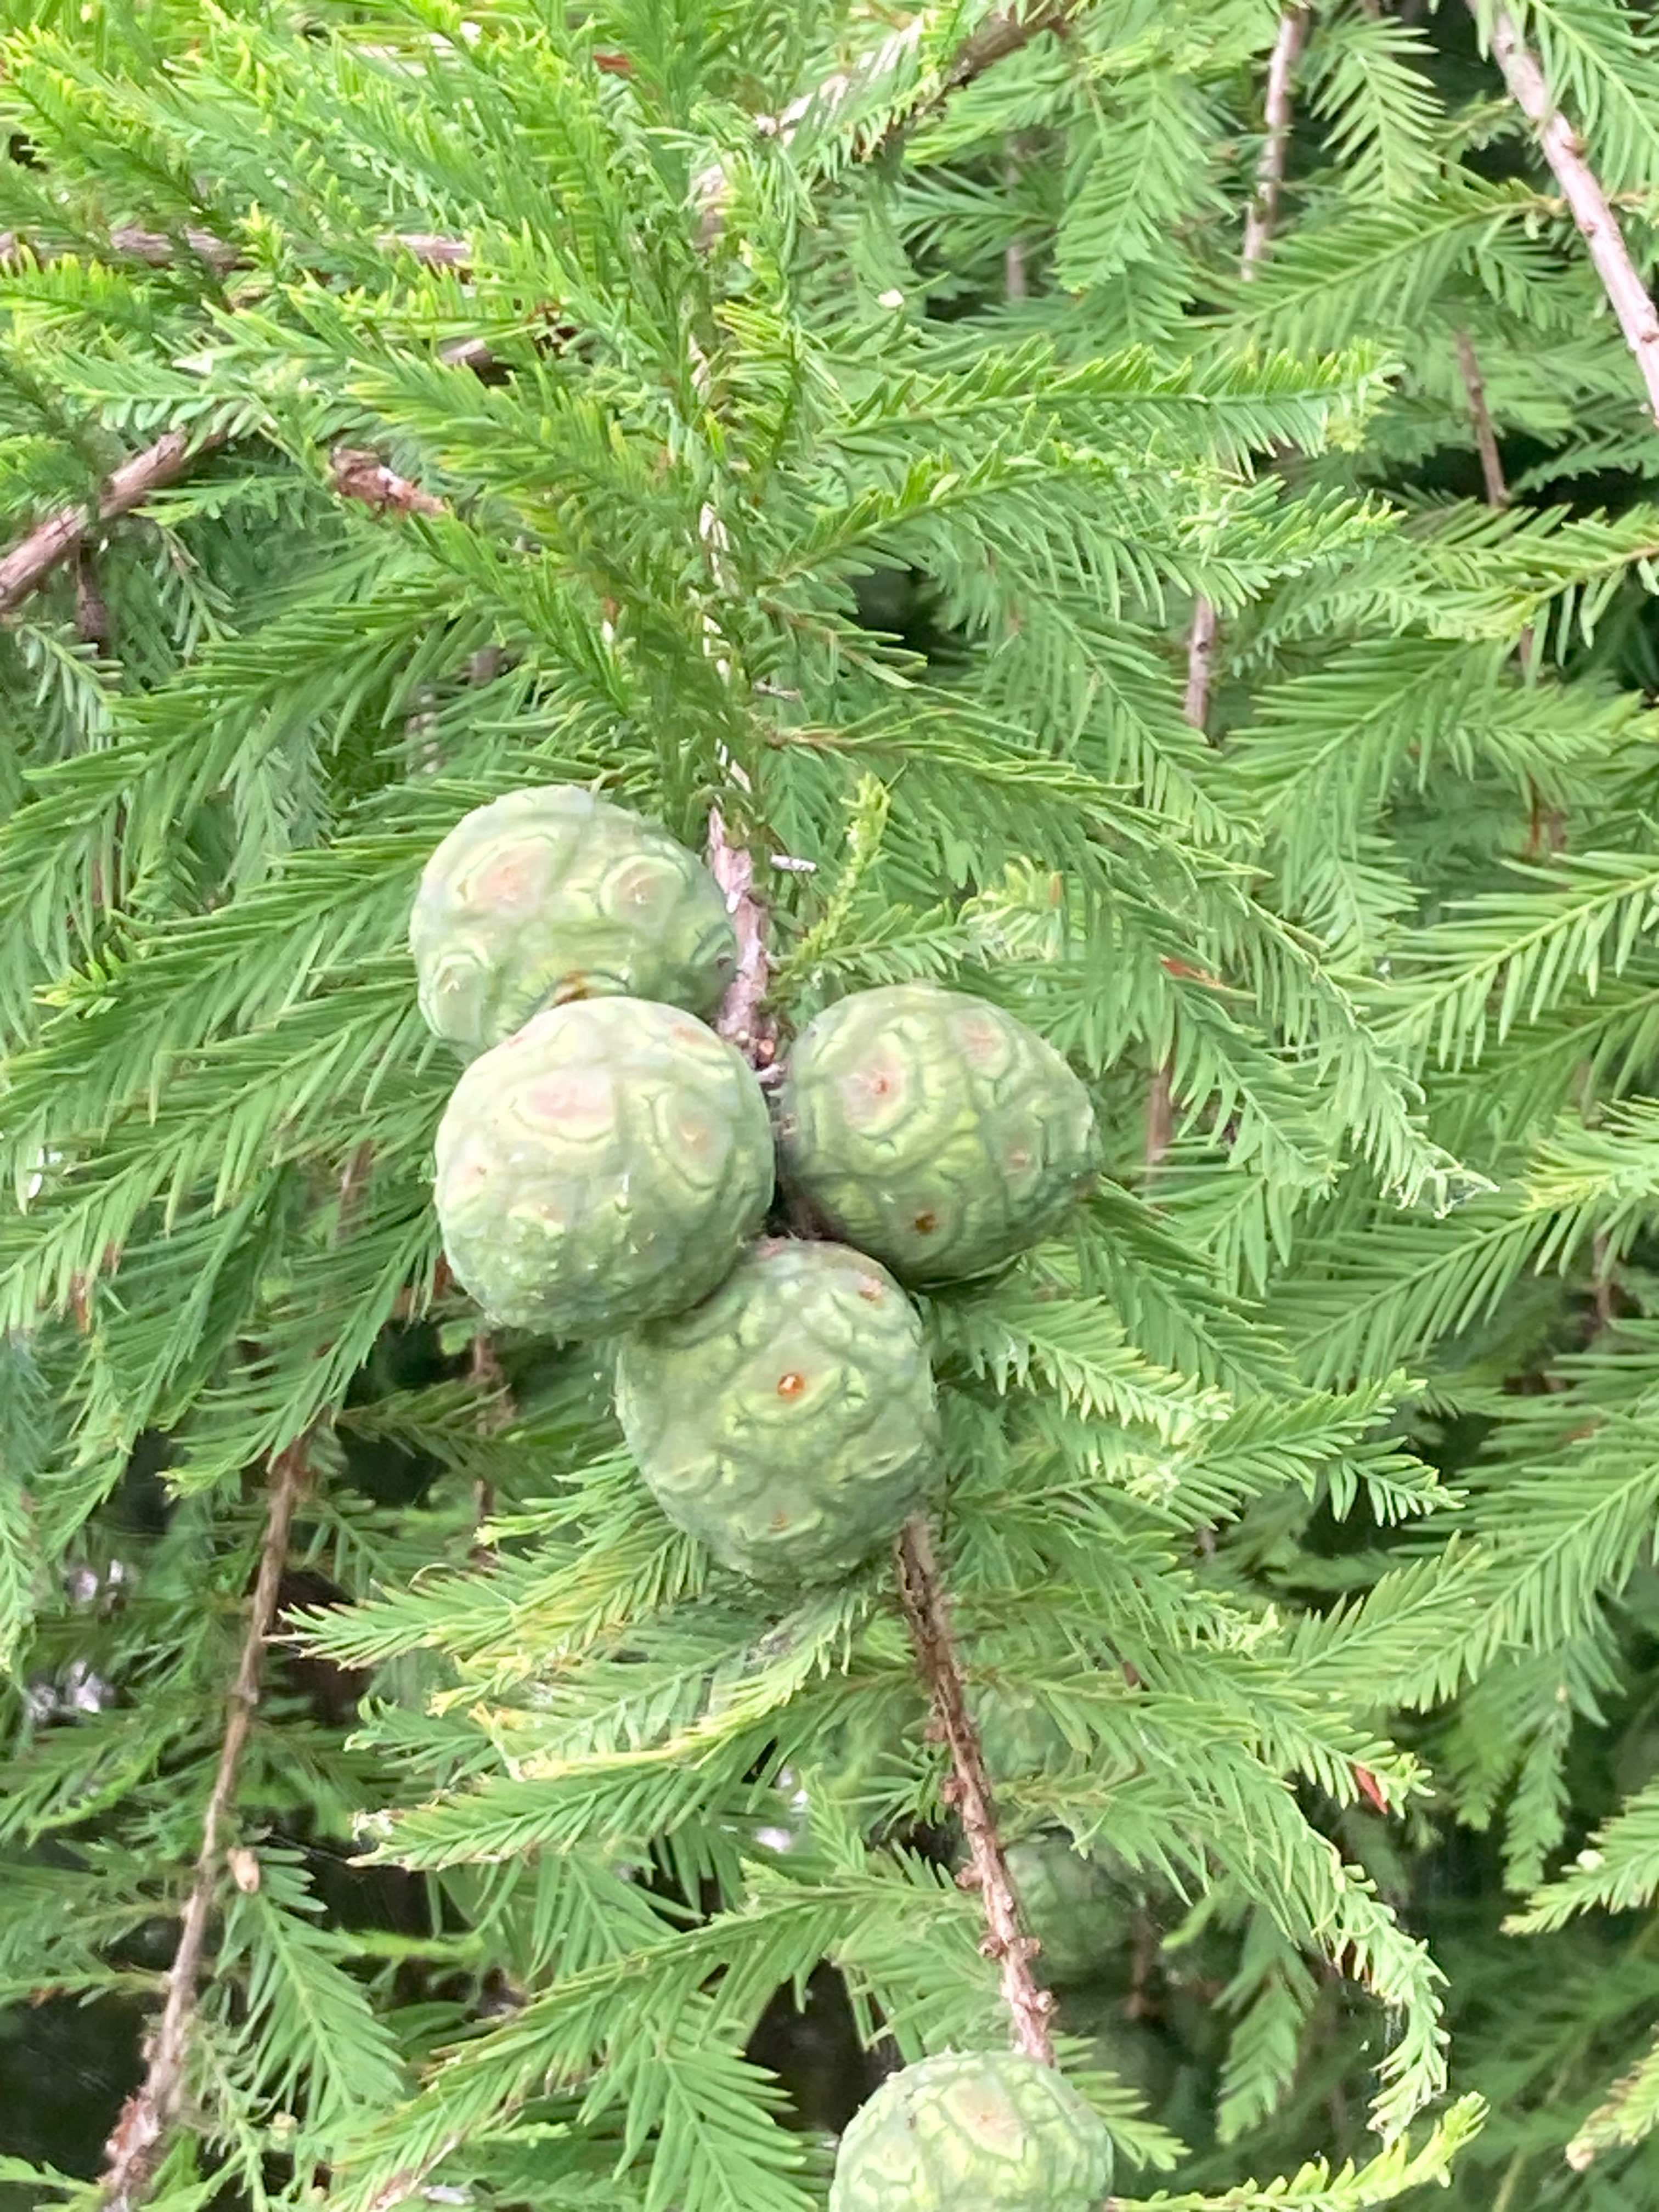 The Scientific Name is Taxodium distichum. You will likely hear them called Bald Cypress, Baldcypress, Swamp Cypress. This picture shows the The cones on this dioecious tree are round, wrinkled, about an inch in diameter, and purplish green which matures to brown. The scales are thick and irregular. of Taxodium distichum